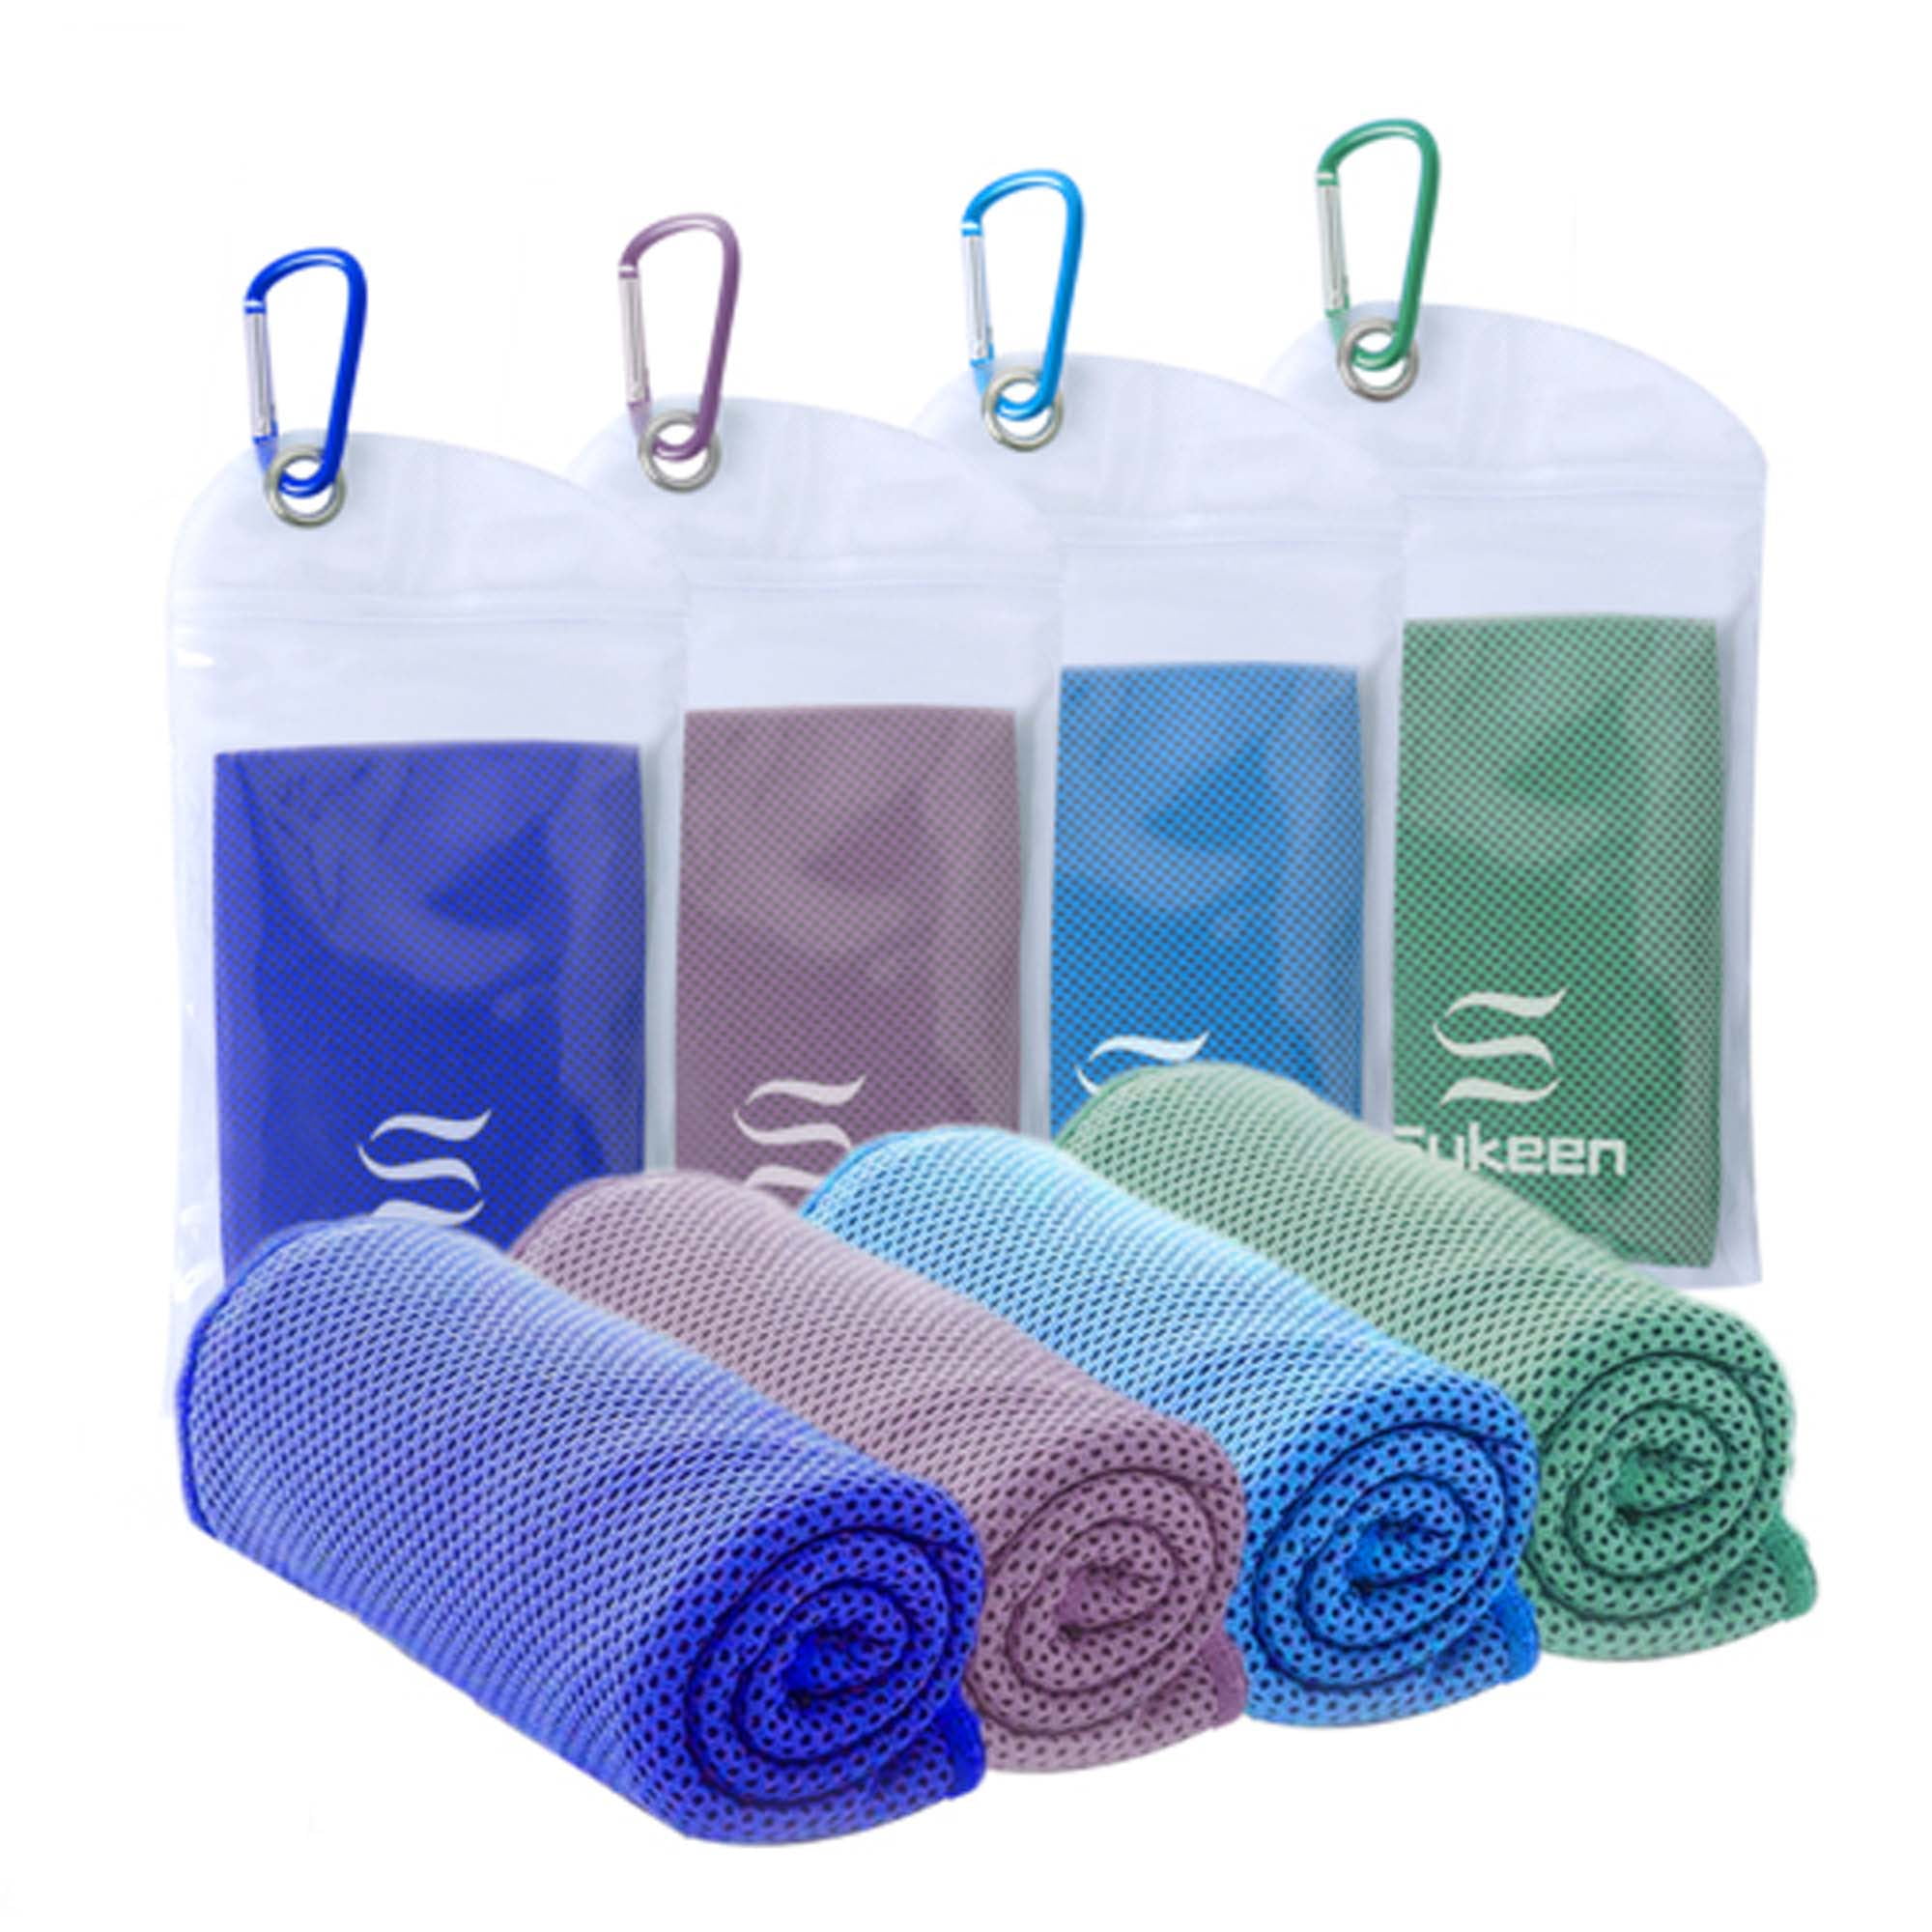 4 Packs Cooling Towel (40x12) by Sukeen, Ice Towel, Soft Breathable  Chilly Towel, Cooling Towels for Neck，Microfiber Towel for Yoga, Sport,  Running, Gym, Workout, Camping 